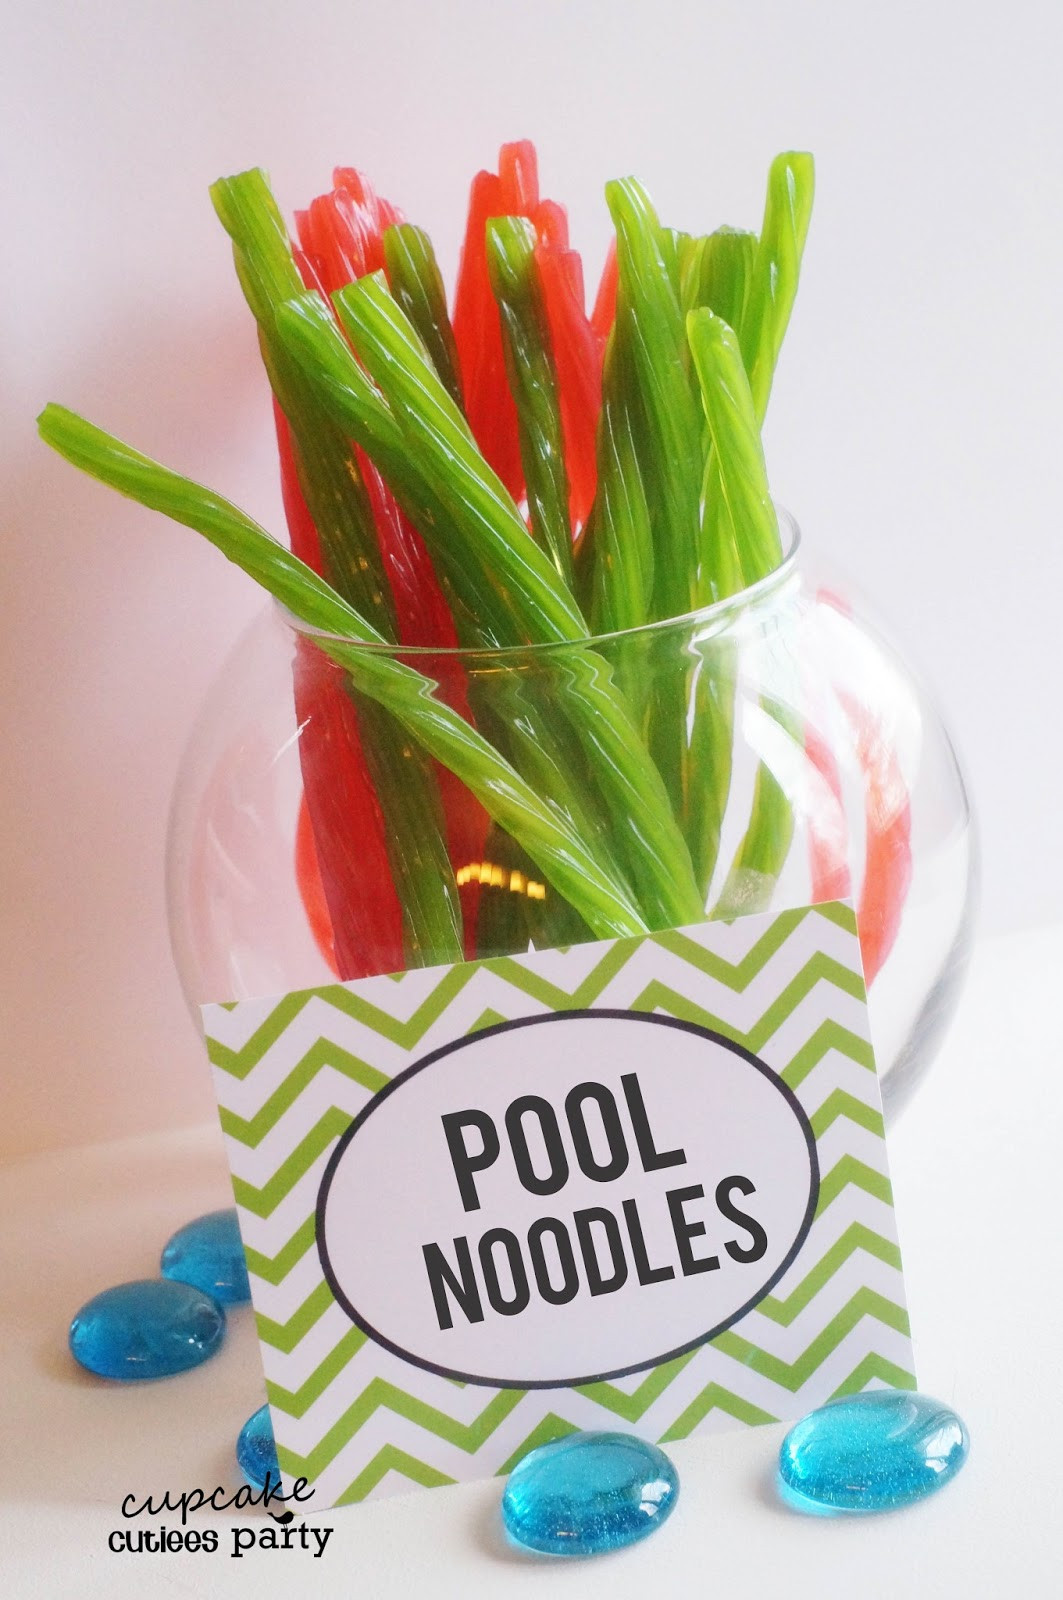 Pool Party Snack Ideas
 Cupcake Cutiees Beach Party Pool Party Food Ideas